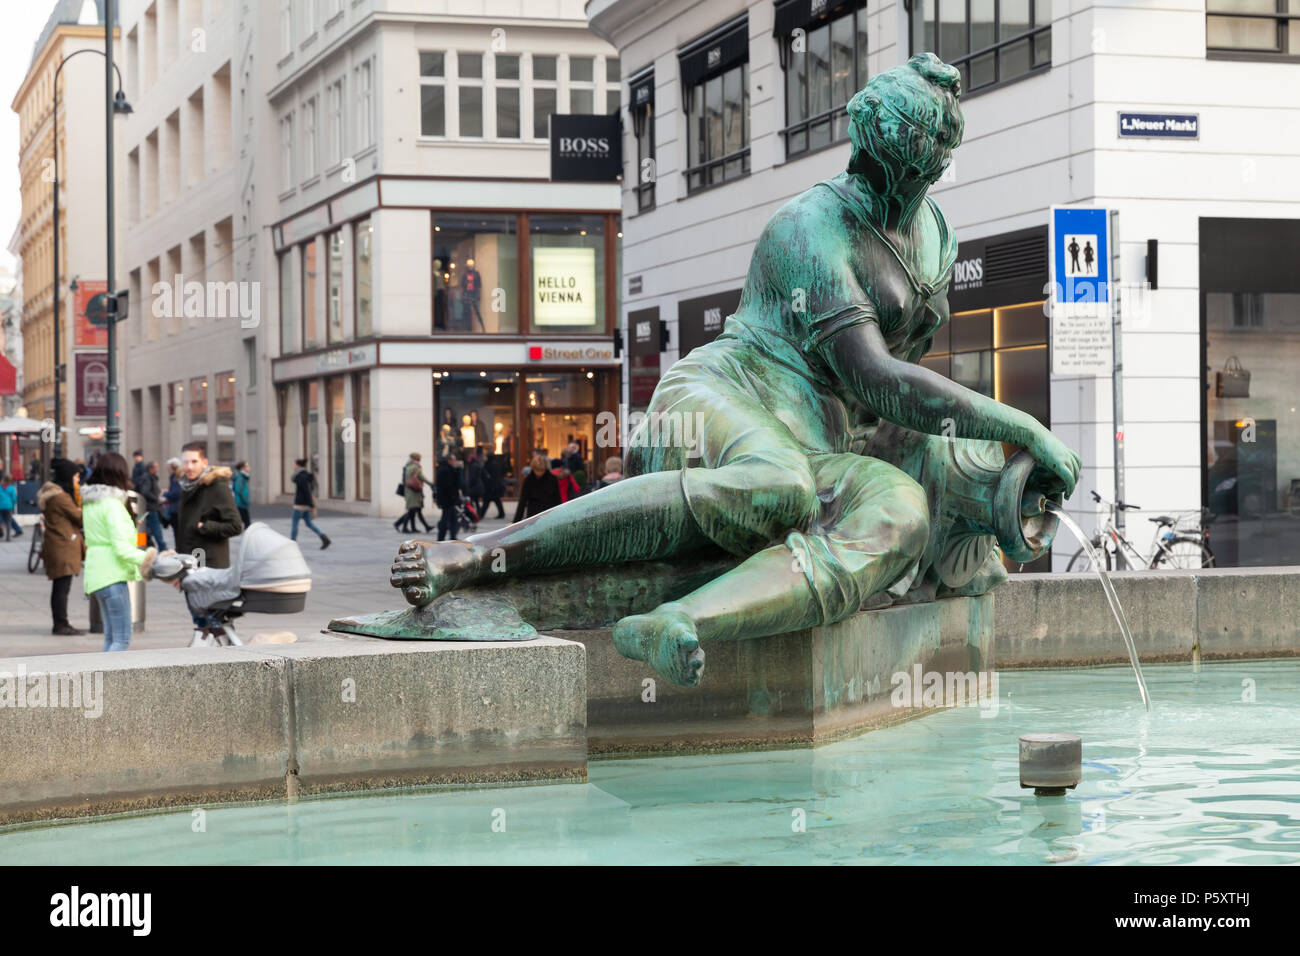 Vienna, Austria - November 4, 2015: Providentia fountain designed by Georg Raphael Donner and built from 1737 to 1739 on the Neuer Markt in Vienna Stock Photo